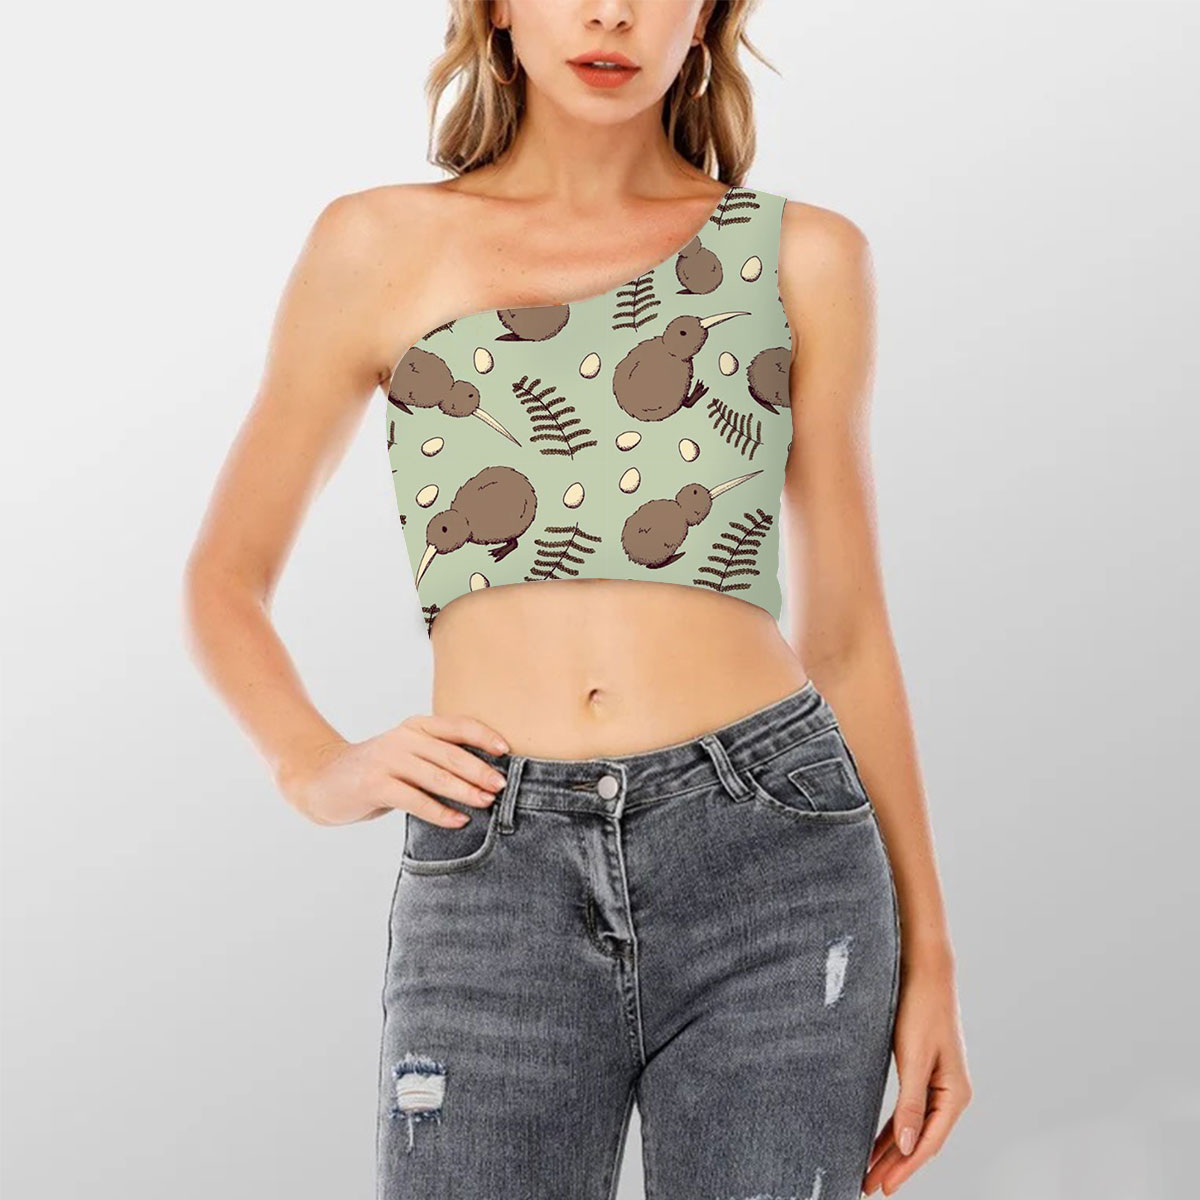 Big And Small Kiwi Bird Shoulder Cropped Top 6